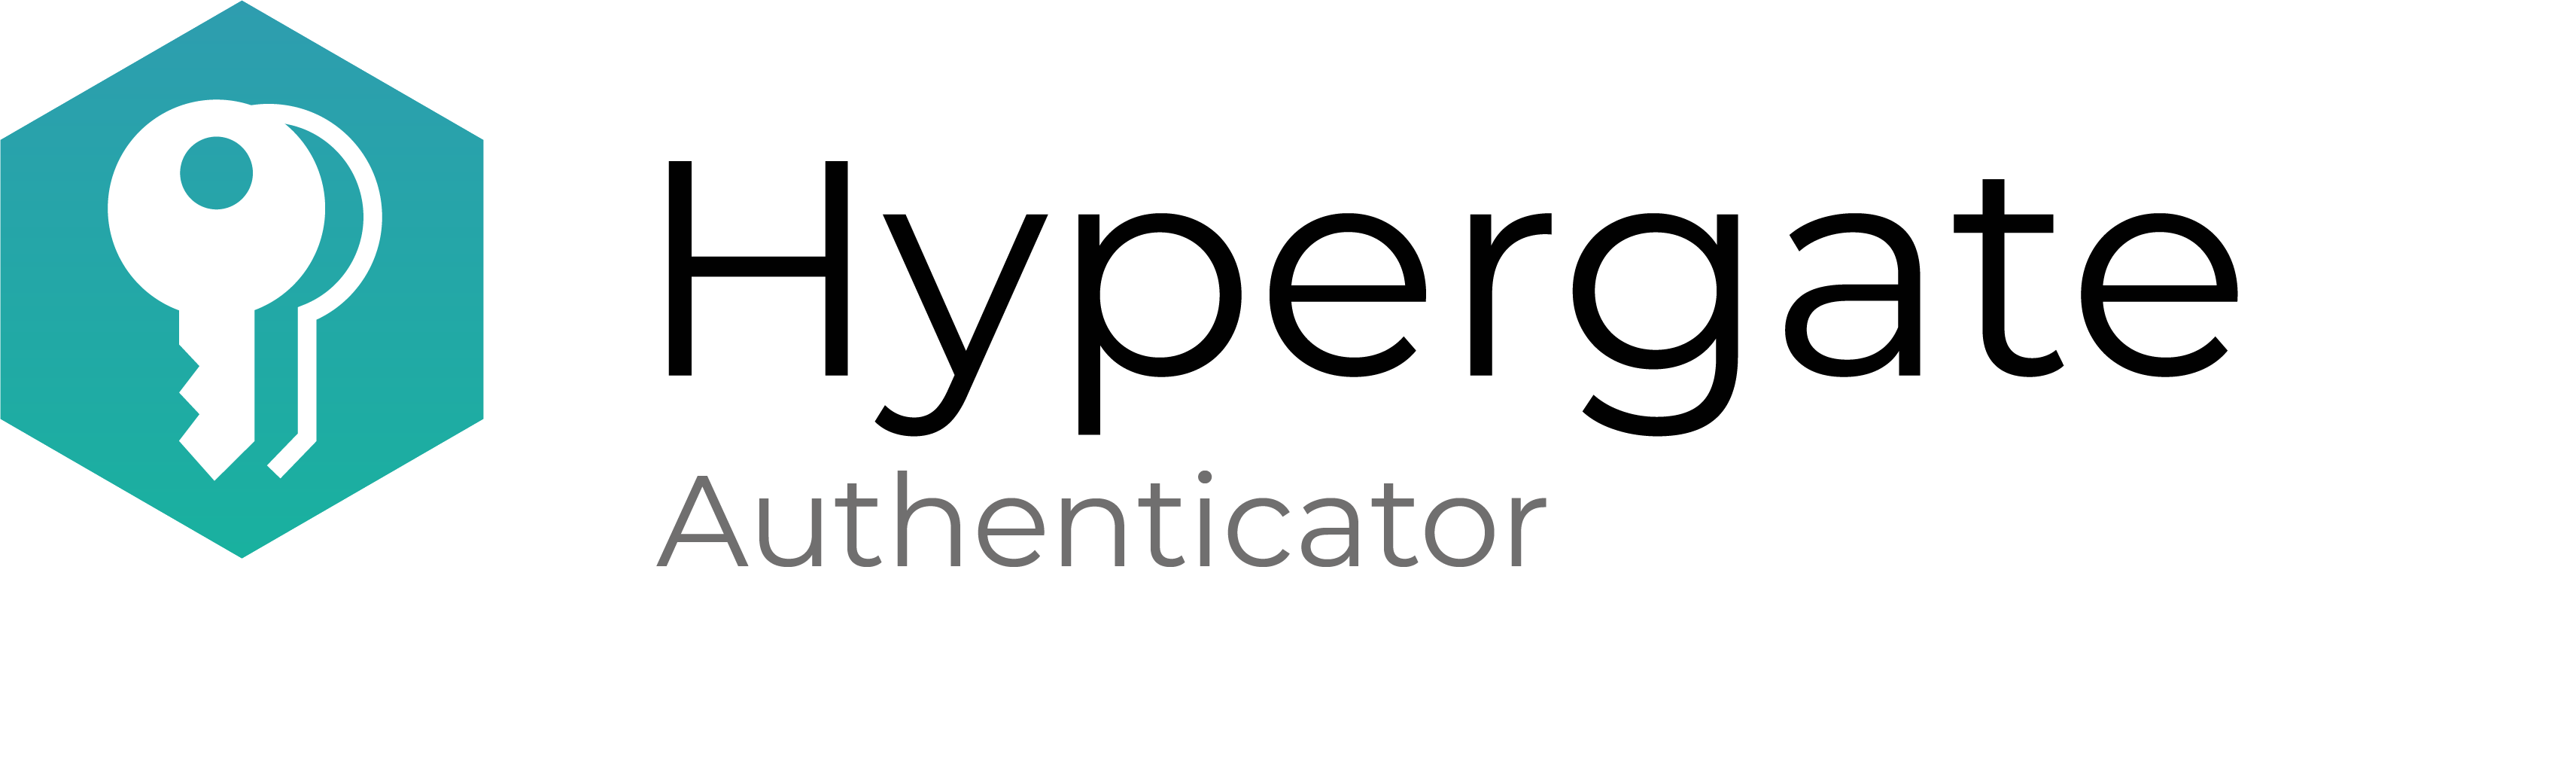 Hypergate Authenticator | Android & iOS